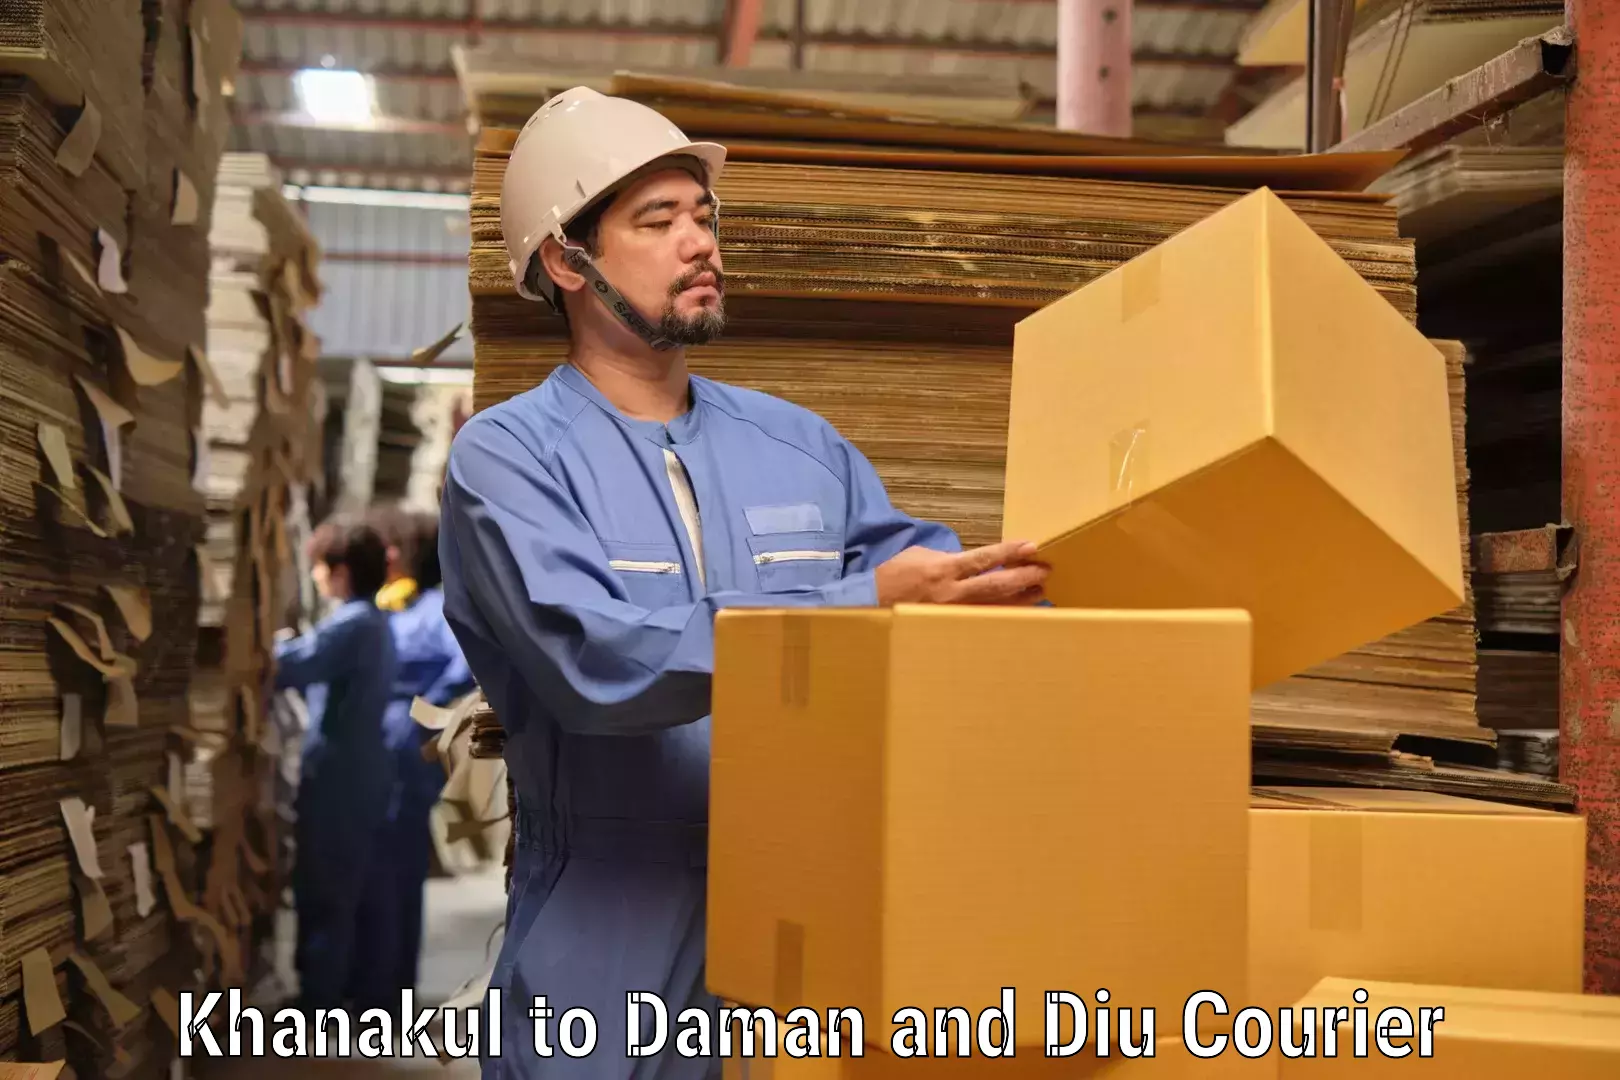 Automated parcel services Khanakul to Daman and Diu